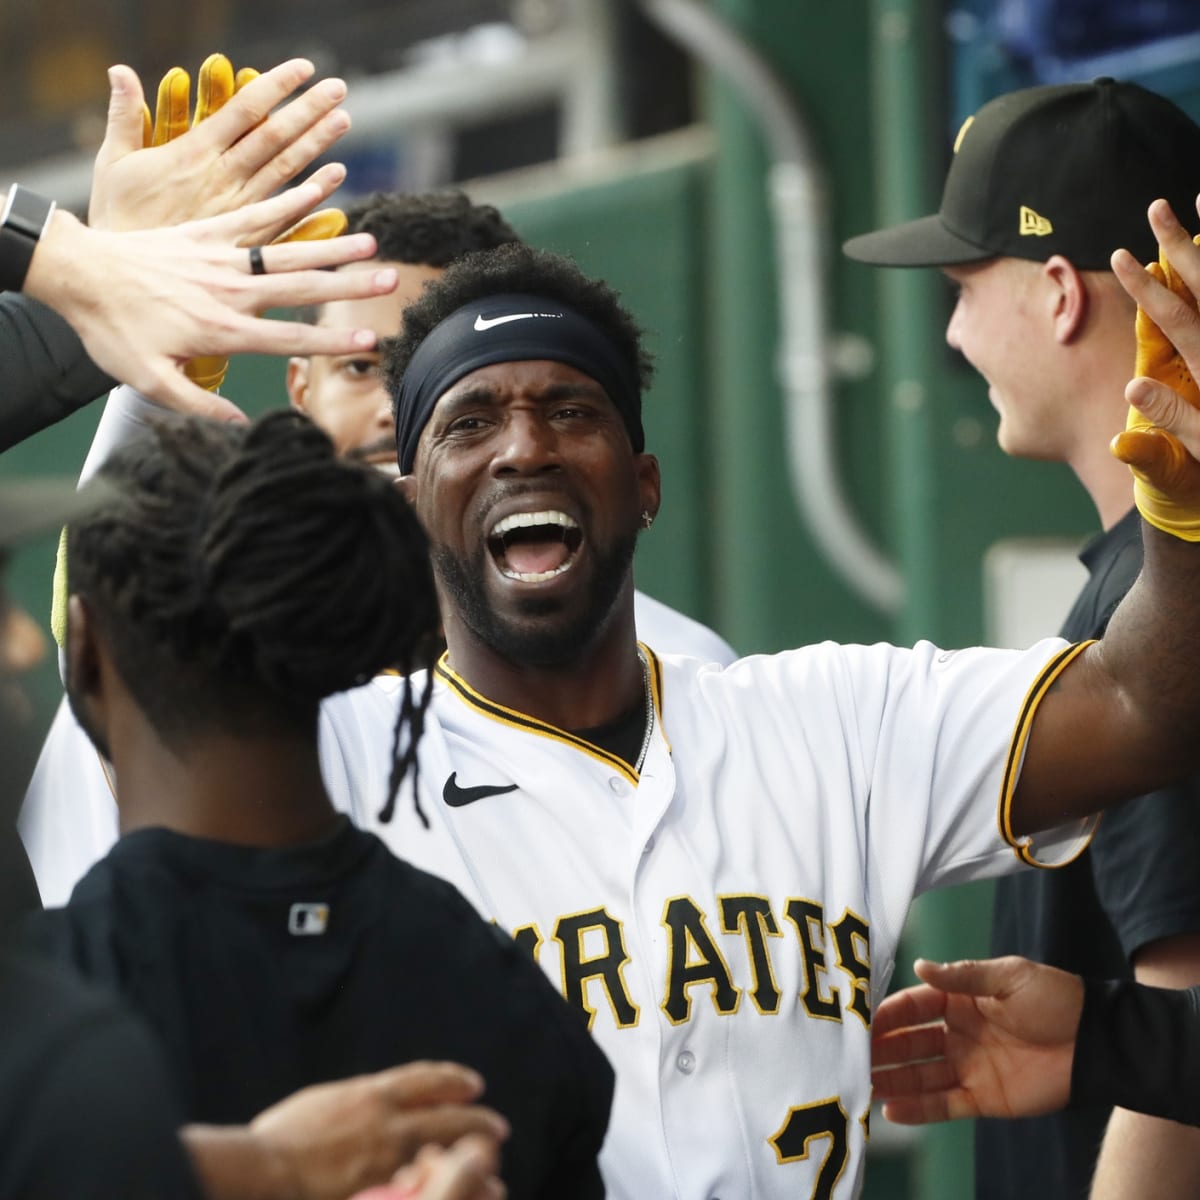 Andrew McCutchen, a franchise legend, is returning to the Pirates